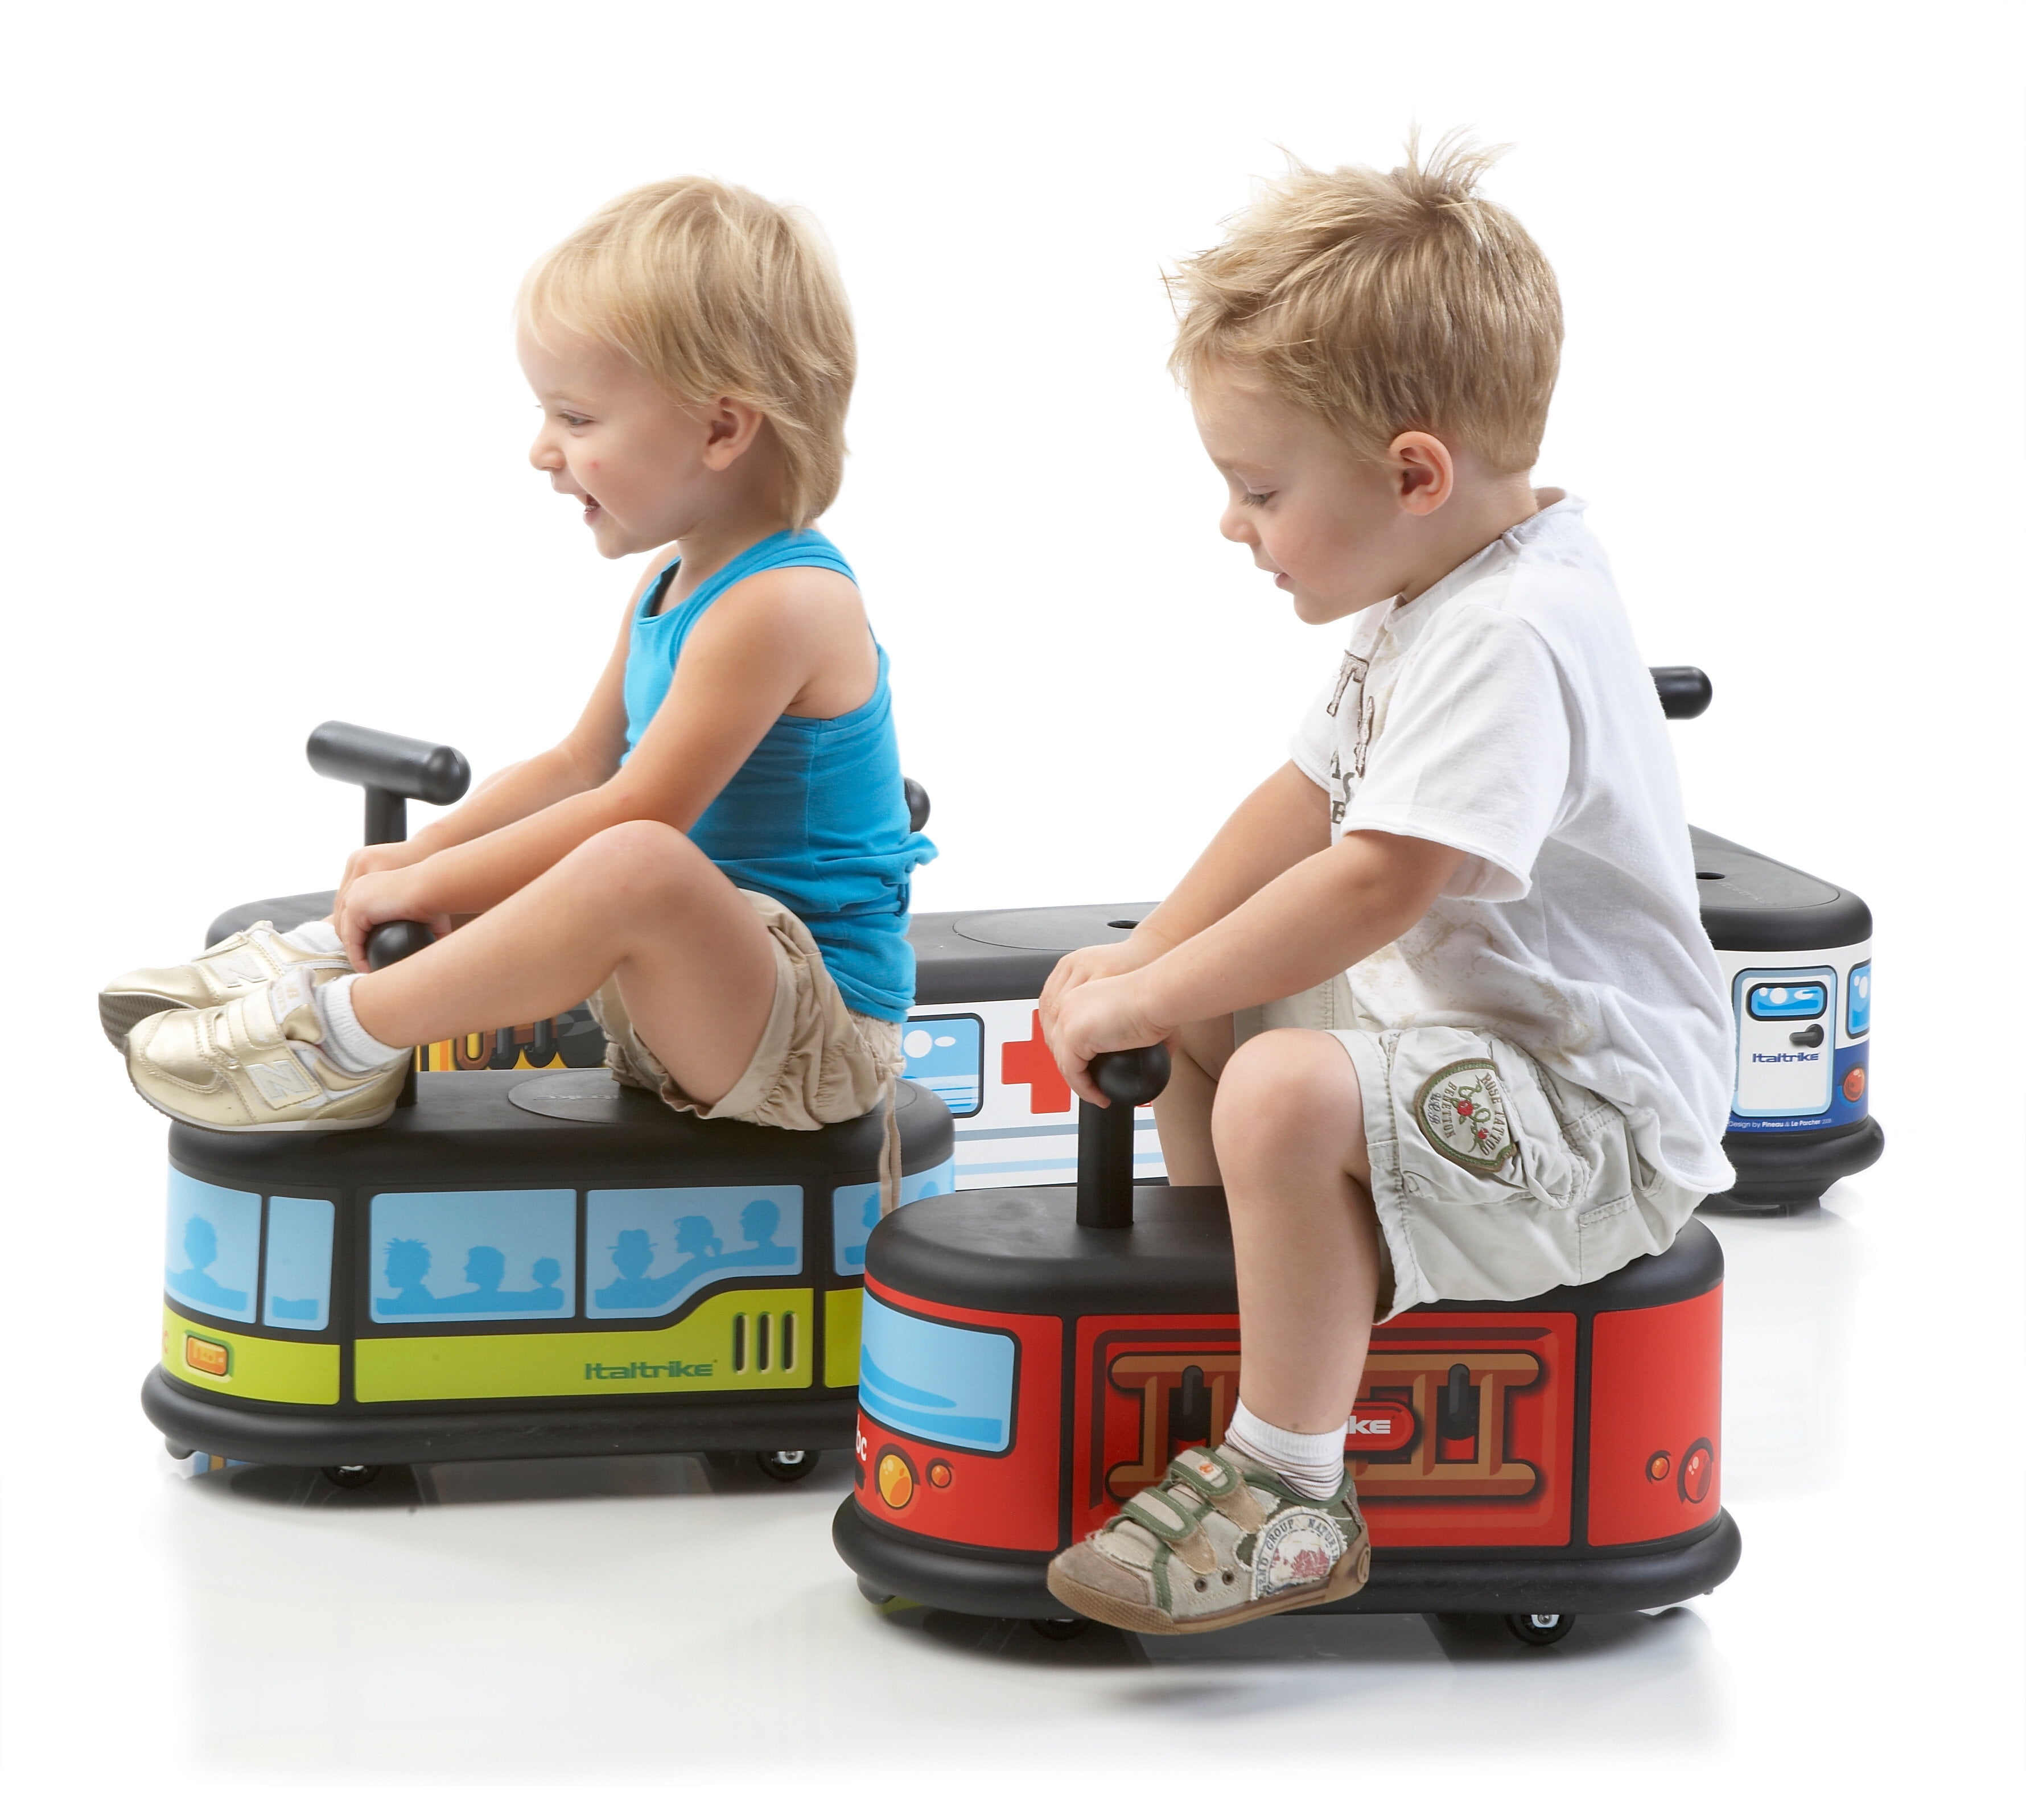 Italtrike La Cosa Fire Truck Ride On Toy for Toddlers, Ages 1-6